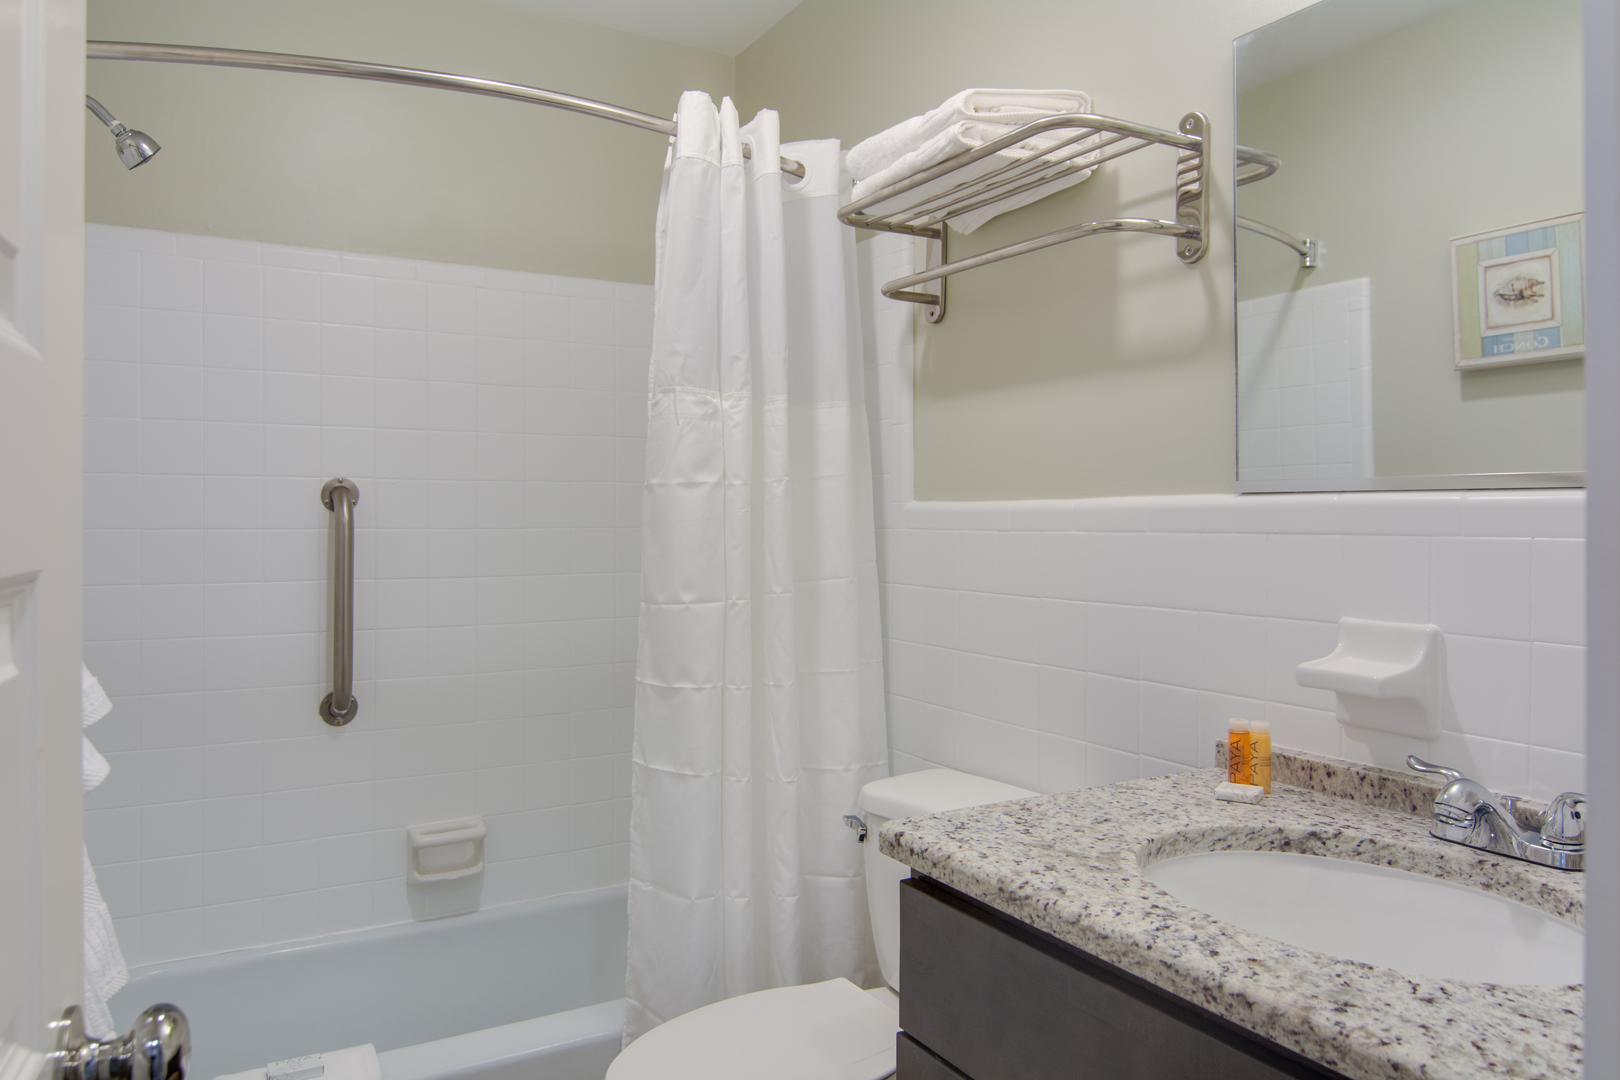 TH24:  The Oregon Inlet Room | Private Bath